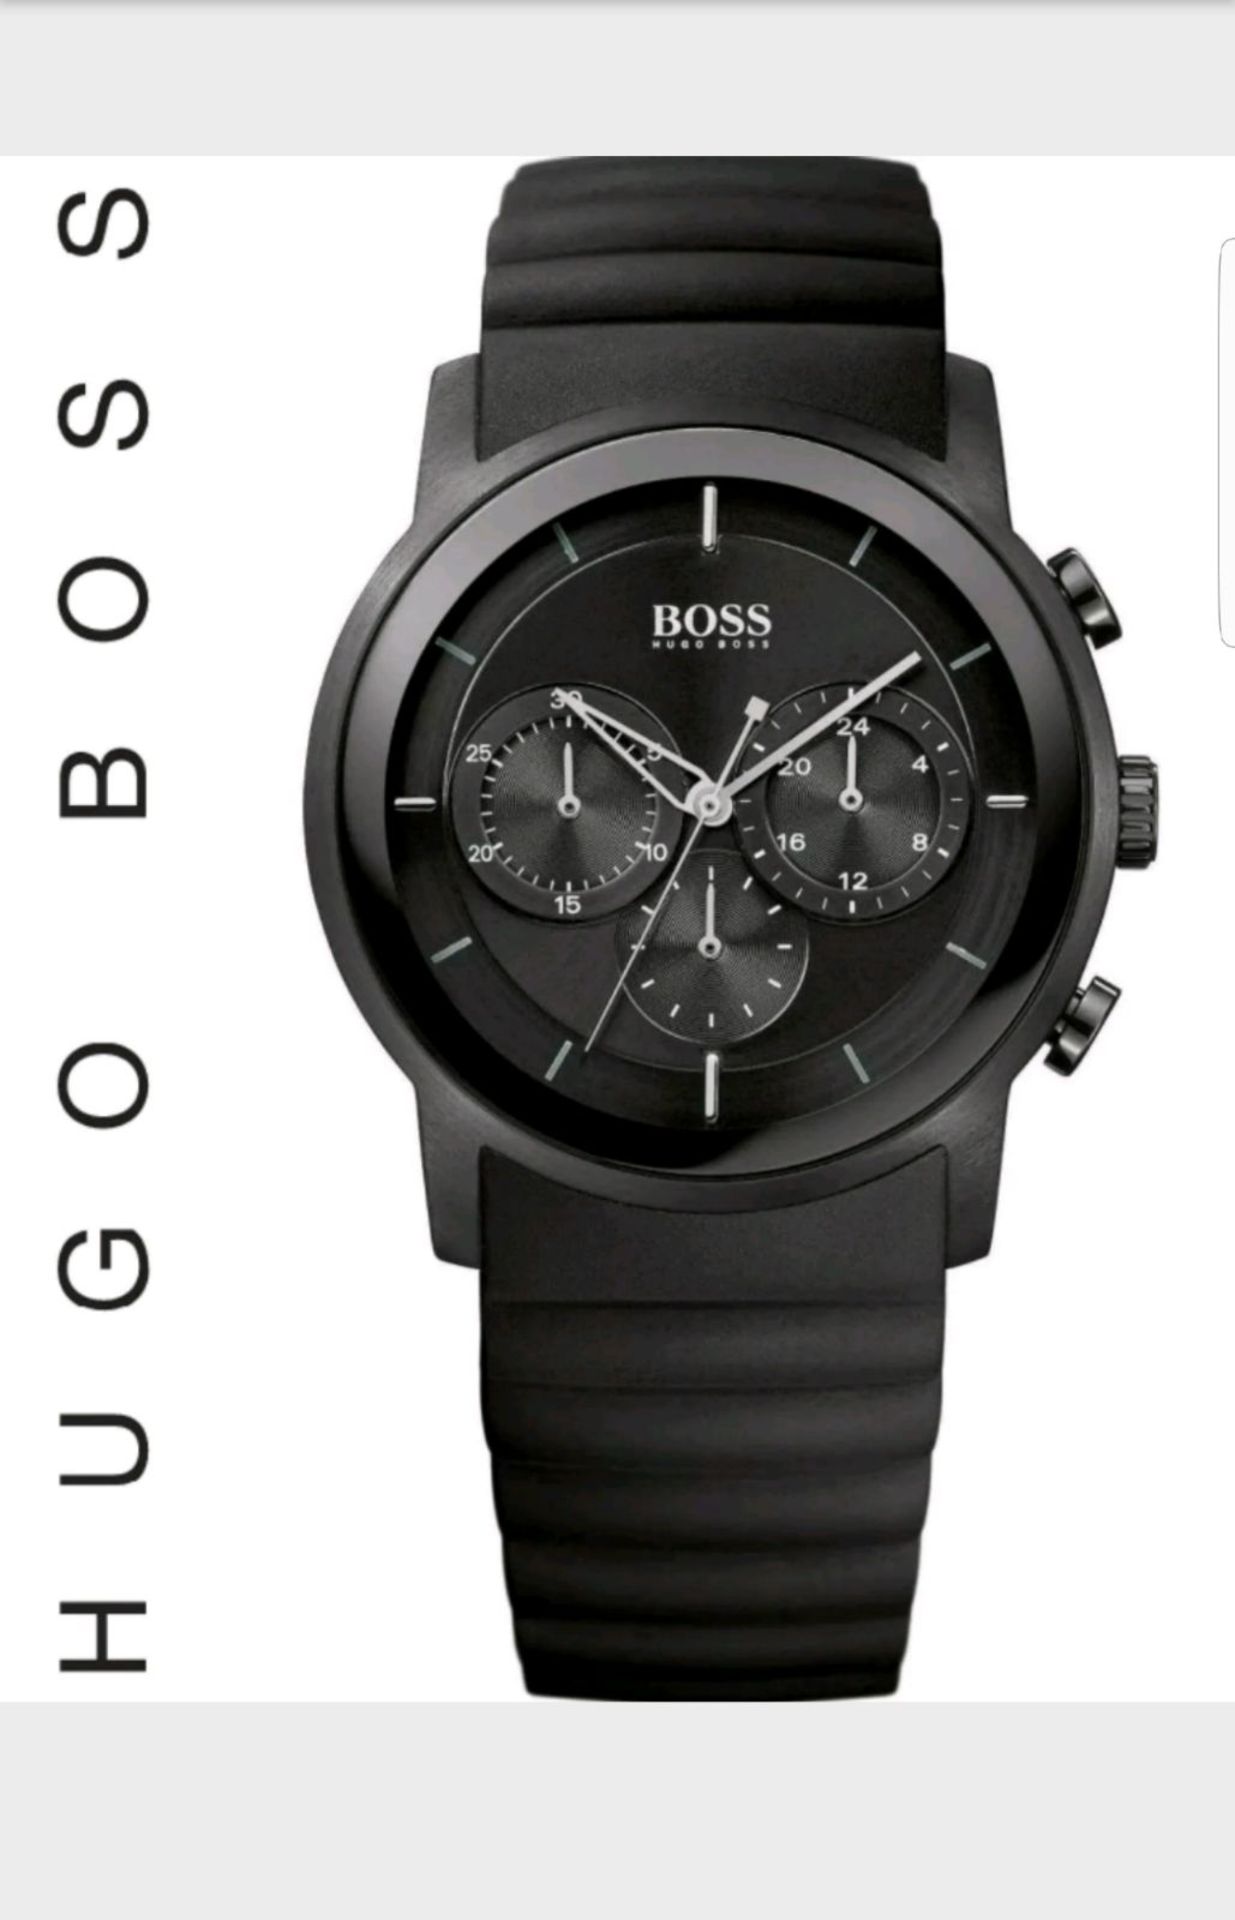 BRAND NEW GENTS HUGO BOSS WATCH 1512639, COMPLETE WITH ORIGINAL BOX AND MANUAL